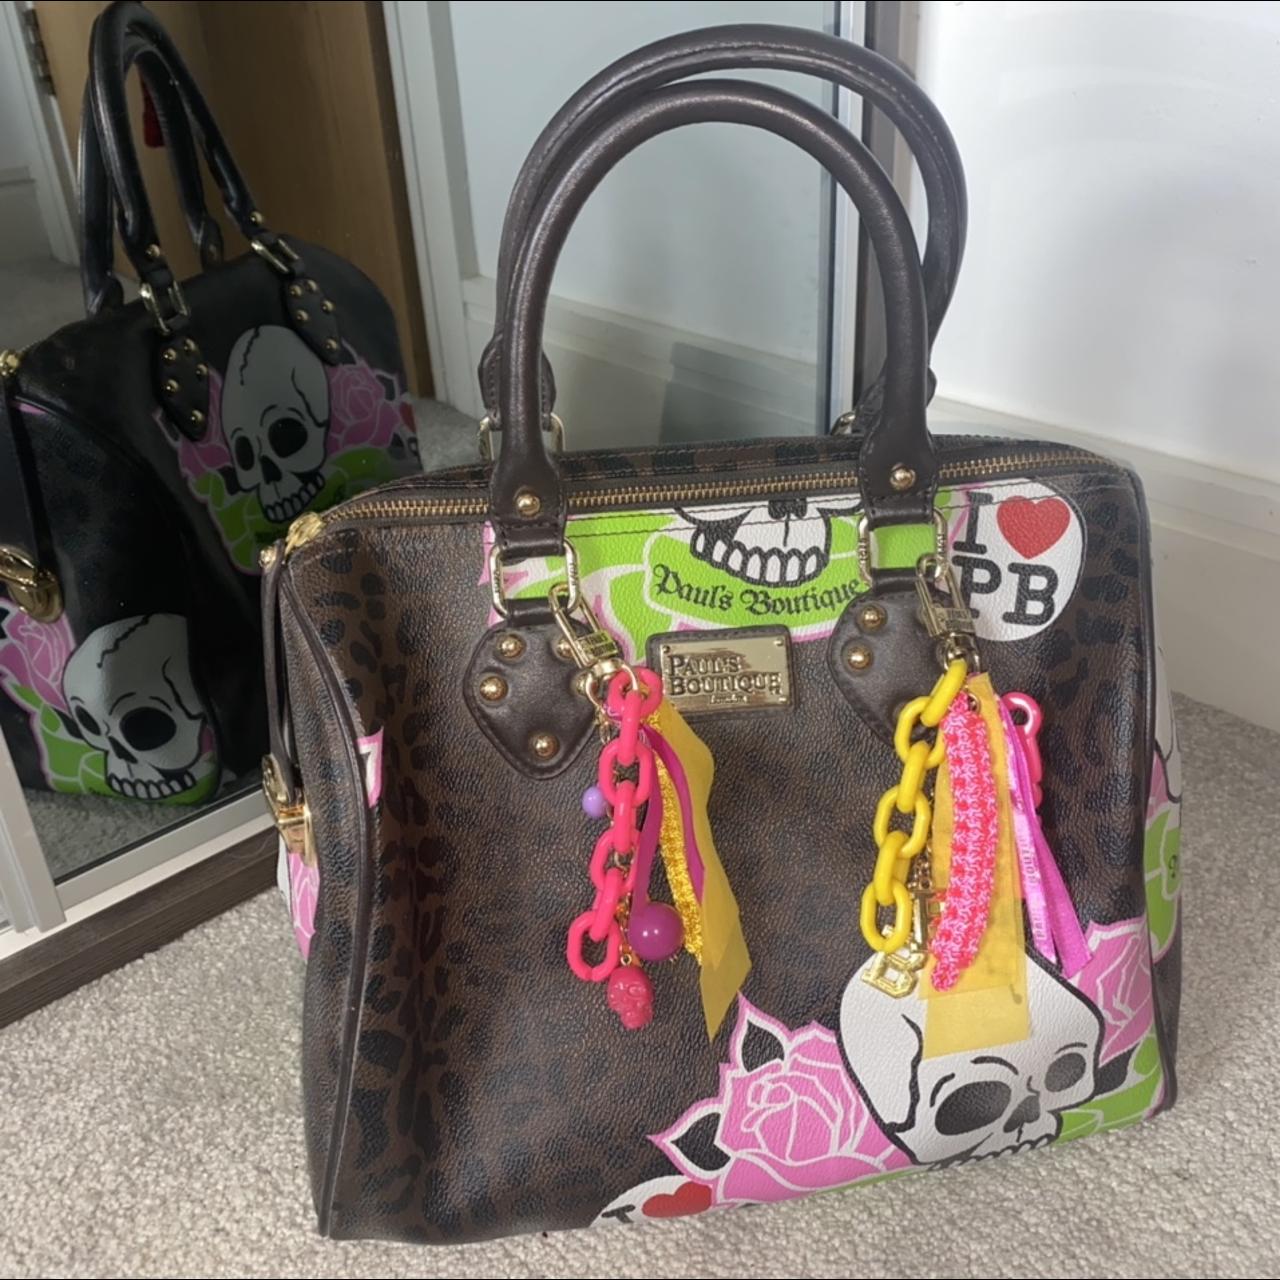 Pauls boutique in England, Handbags, Purses & Women's Bags for Sale